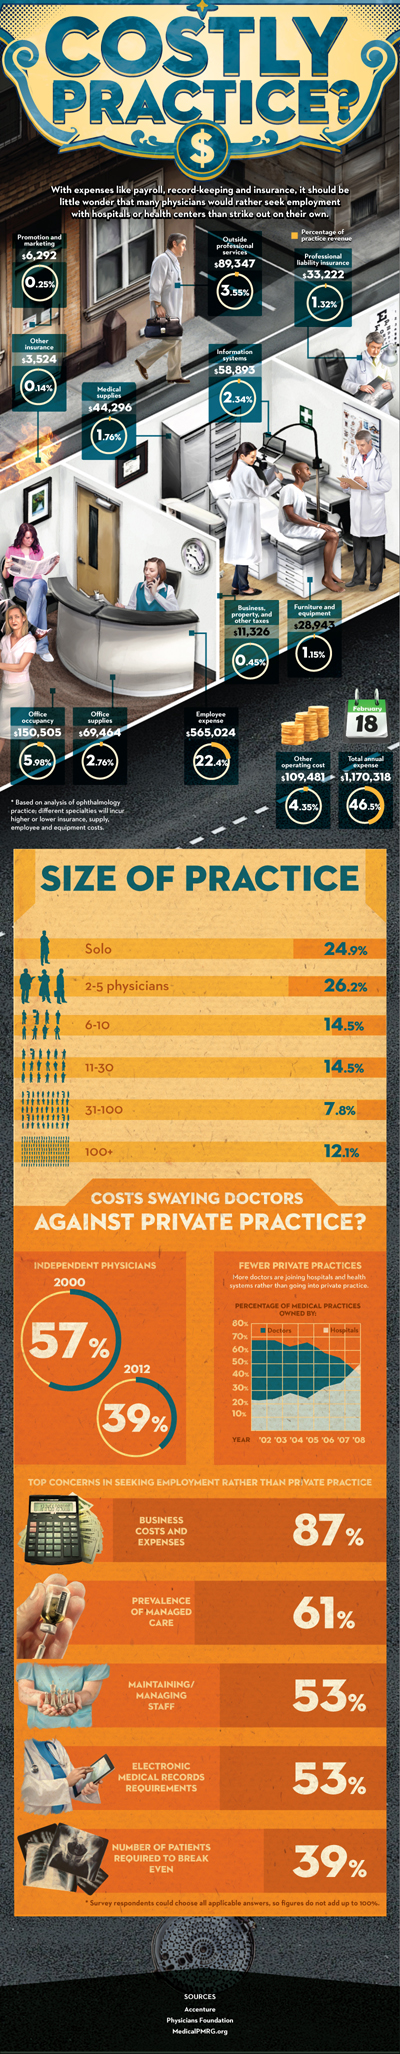 Private practice costs for physicians